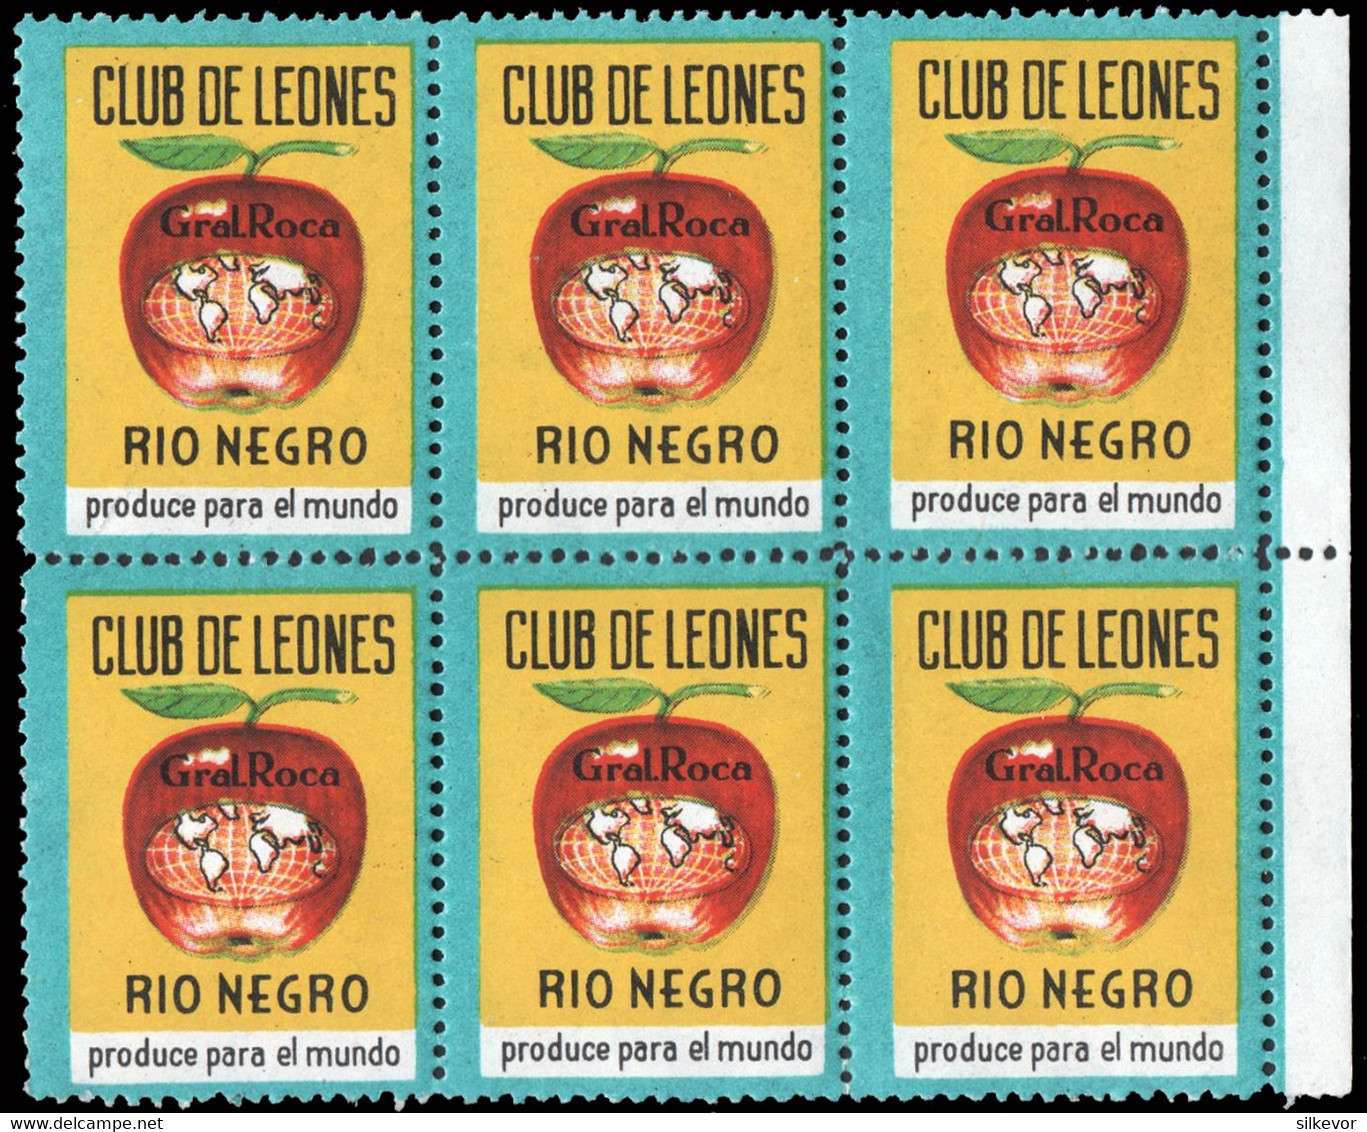 LIONS CLUB-STAMPS-ARGENTINA-CINDERELLA ISSUED IN  1964 BY GENERAL ROCA LIONS CLUB( RIO NEGRO PROVINCE) - Automatenmarken (Frama)